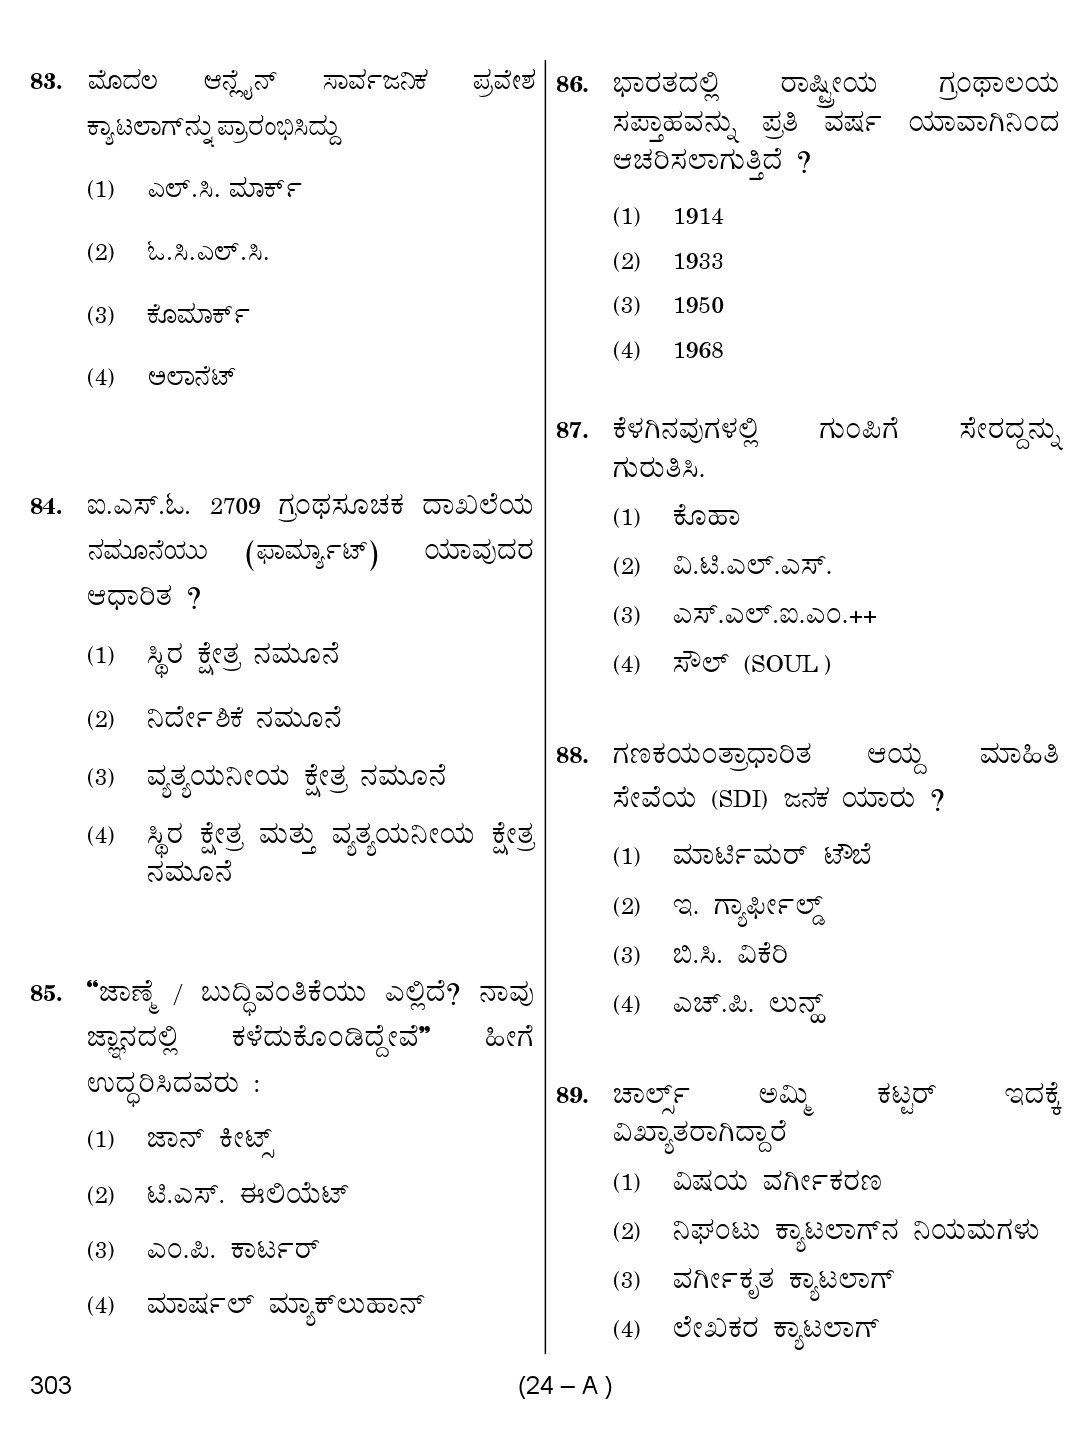 Karnataka PSC 303 Specific Paper II Librarian Exam Sample Question Paper 24